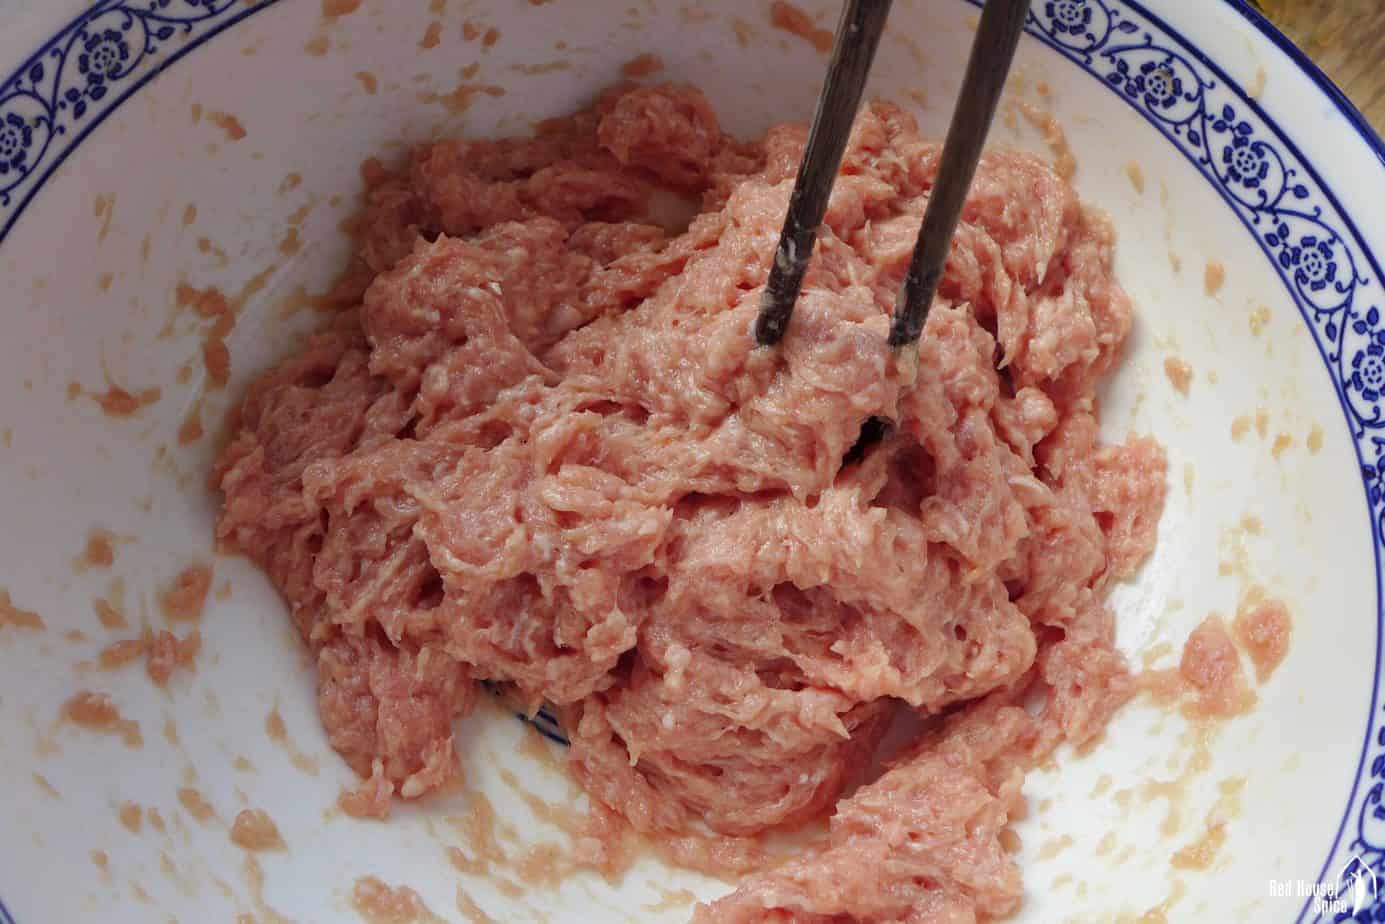 Meatball mixture in a bowl